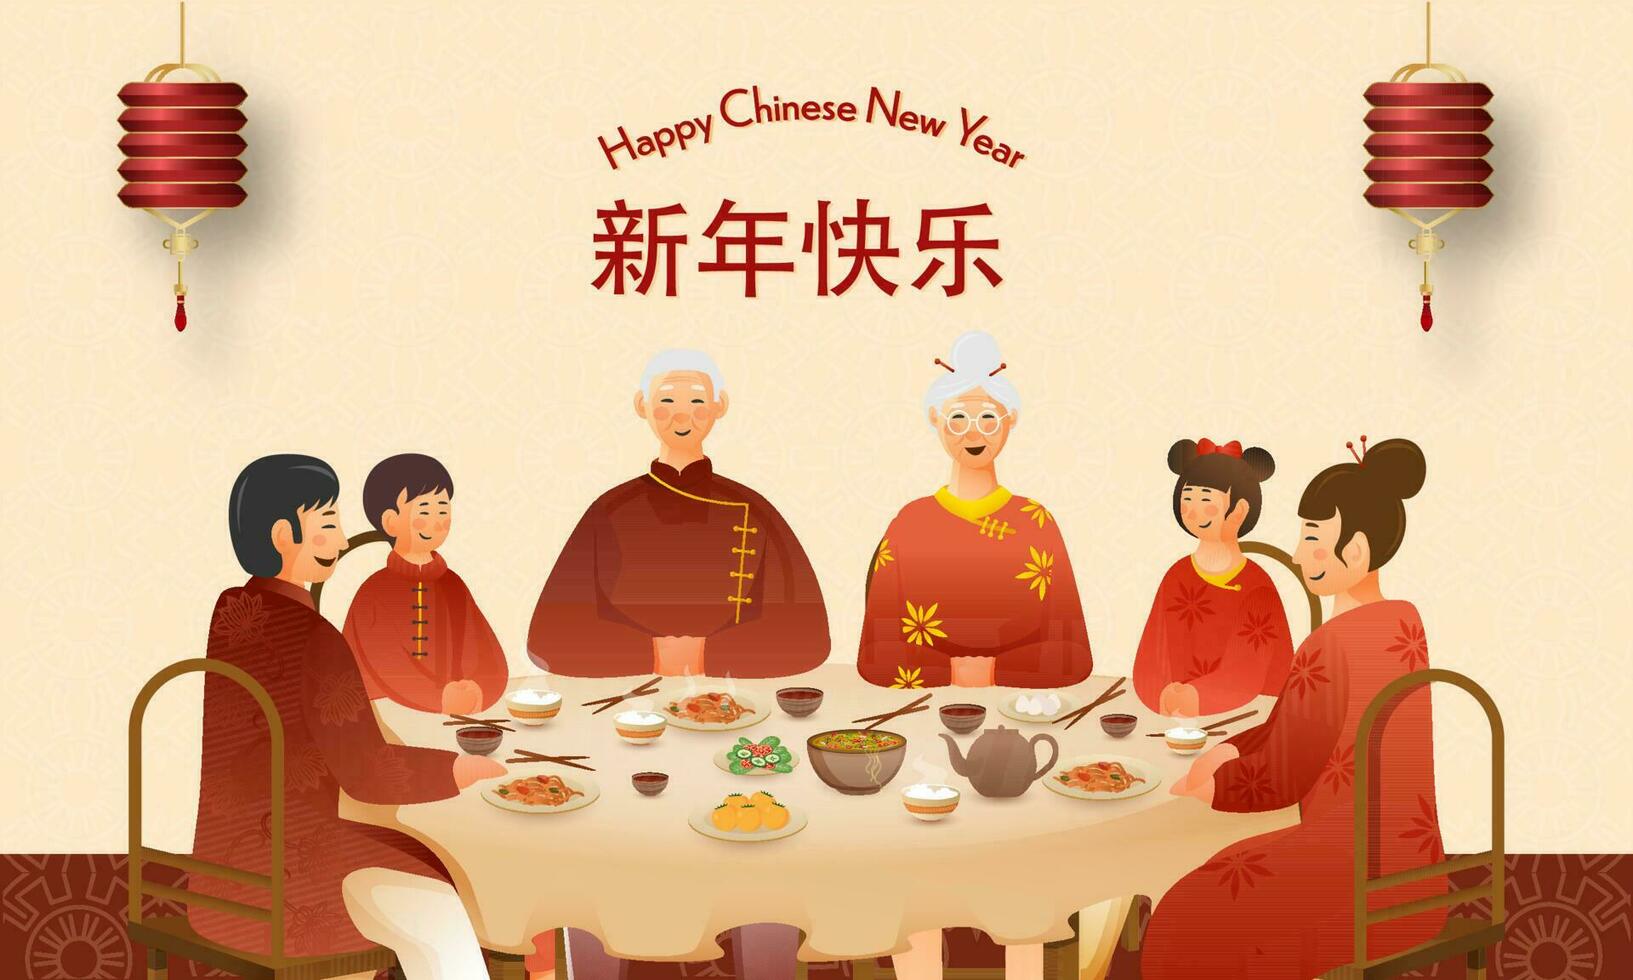 Chinese Family Enjoying Delicious Meal Together At Dining Table And Lanterns Hang On Peach Background For Happy Chinese New Year Concept. vector